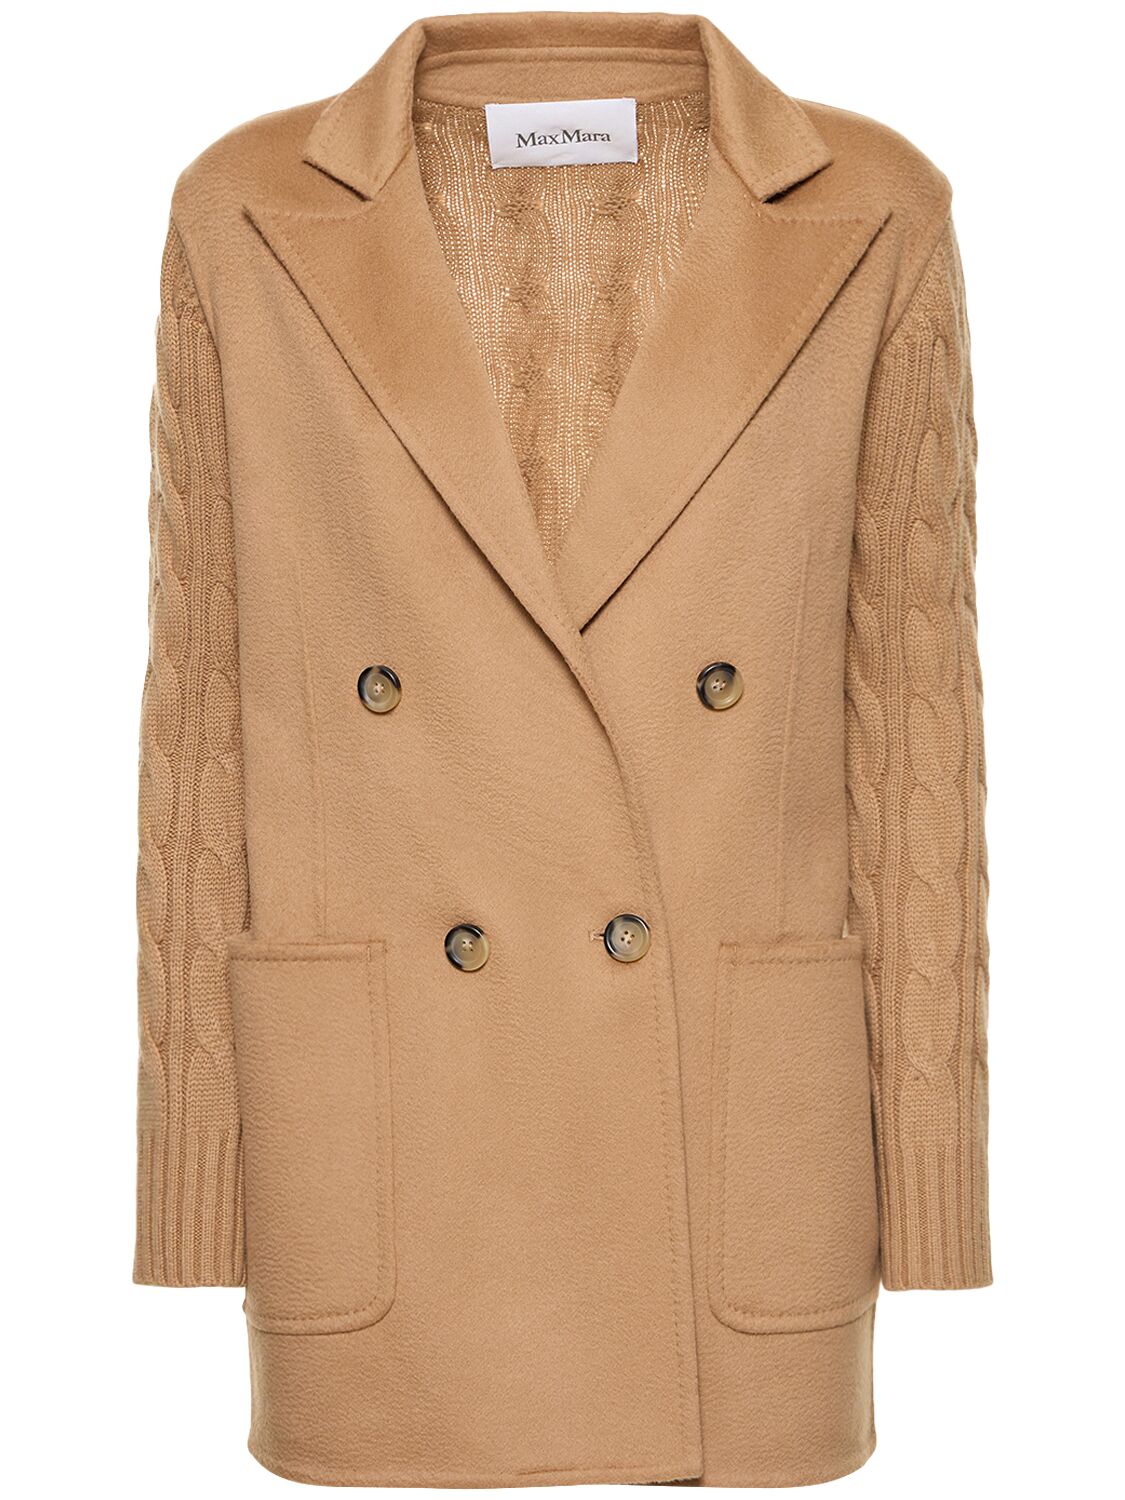 Max Mara Dalida Cable Knit Wo & Cashmere Jacket In Camel